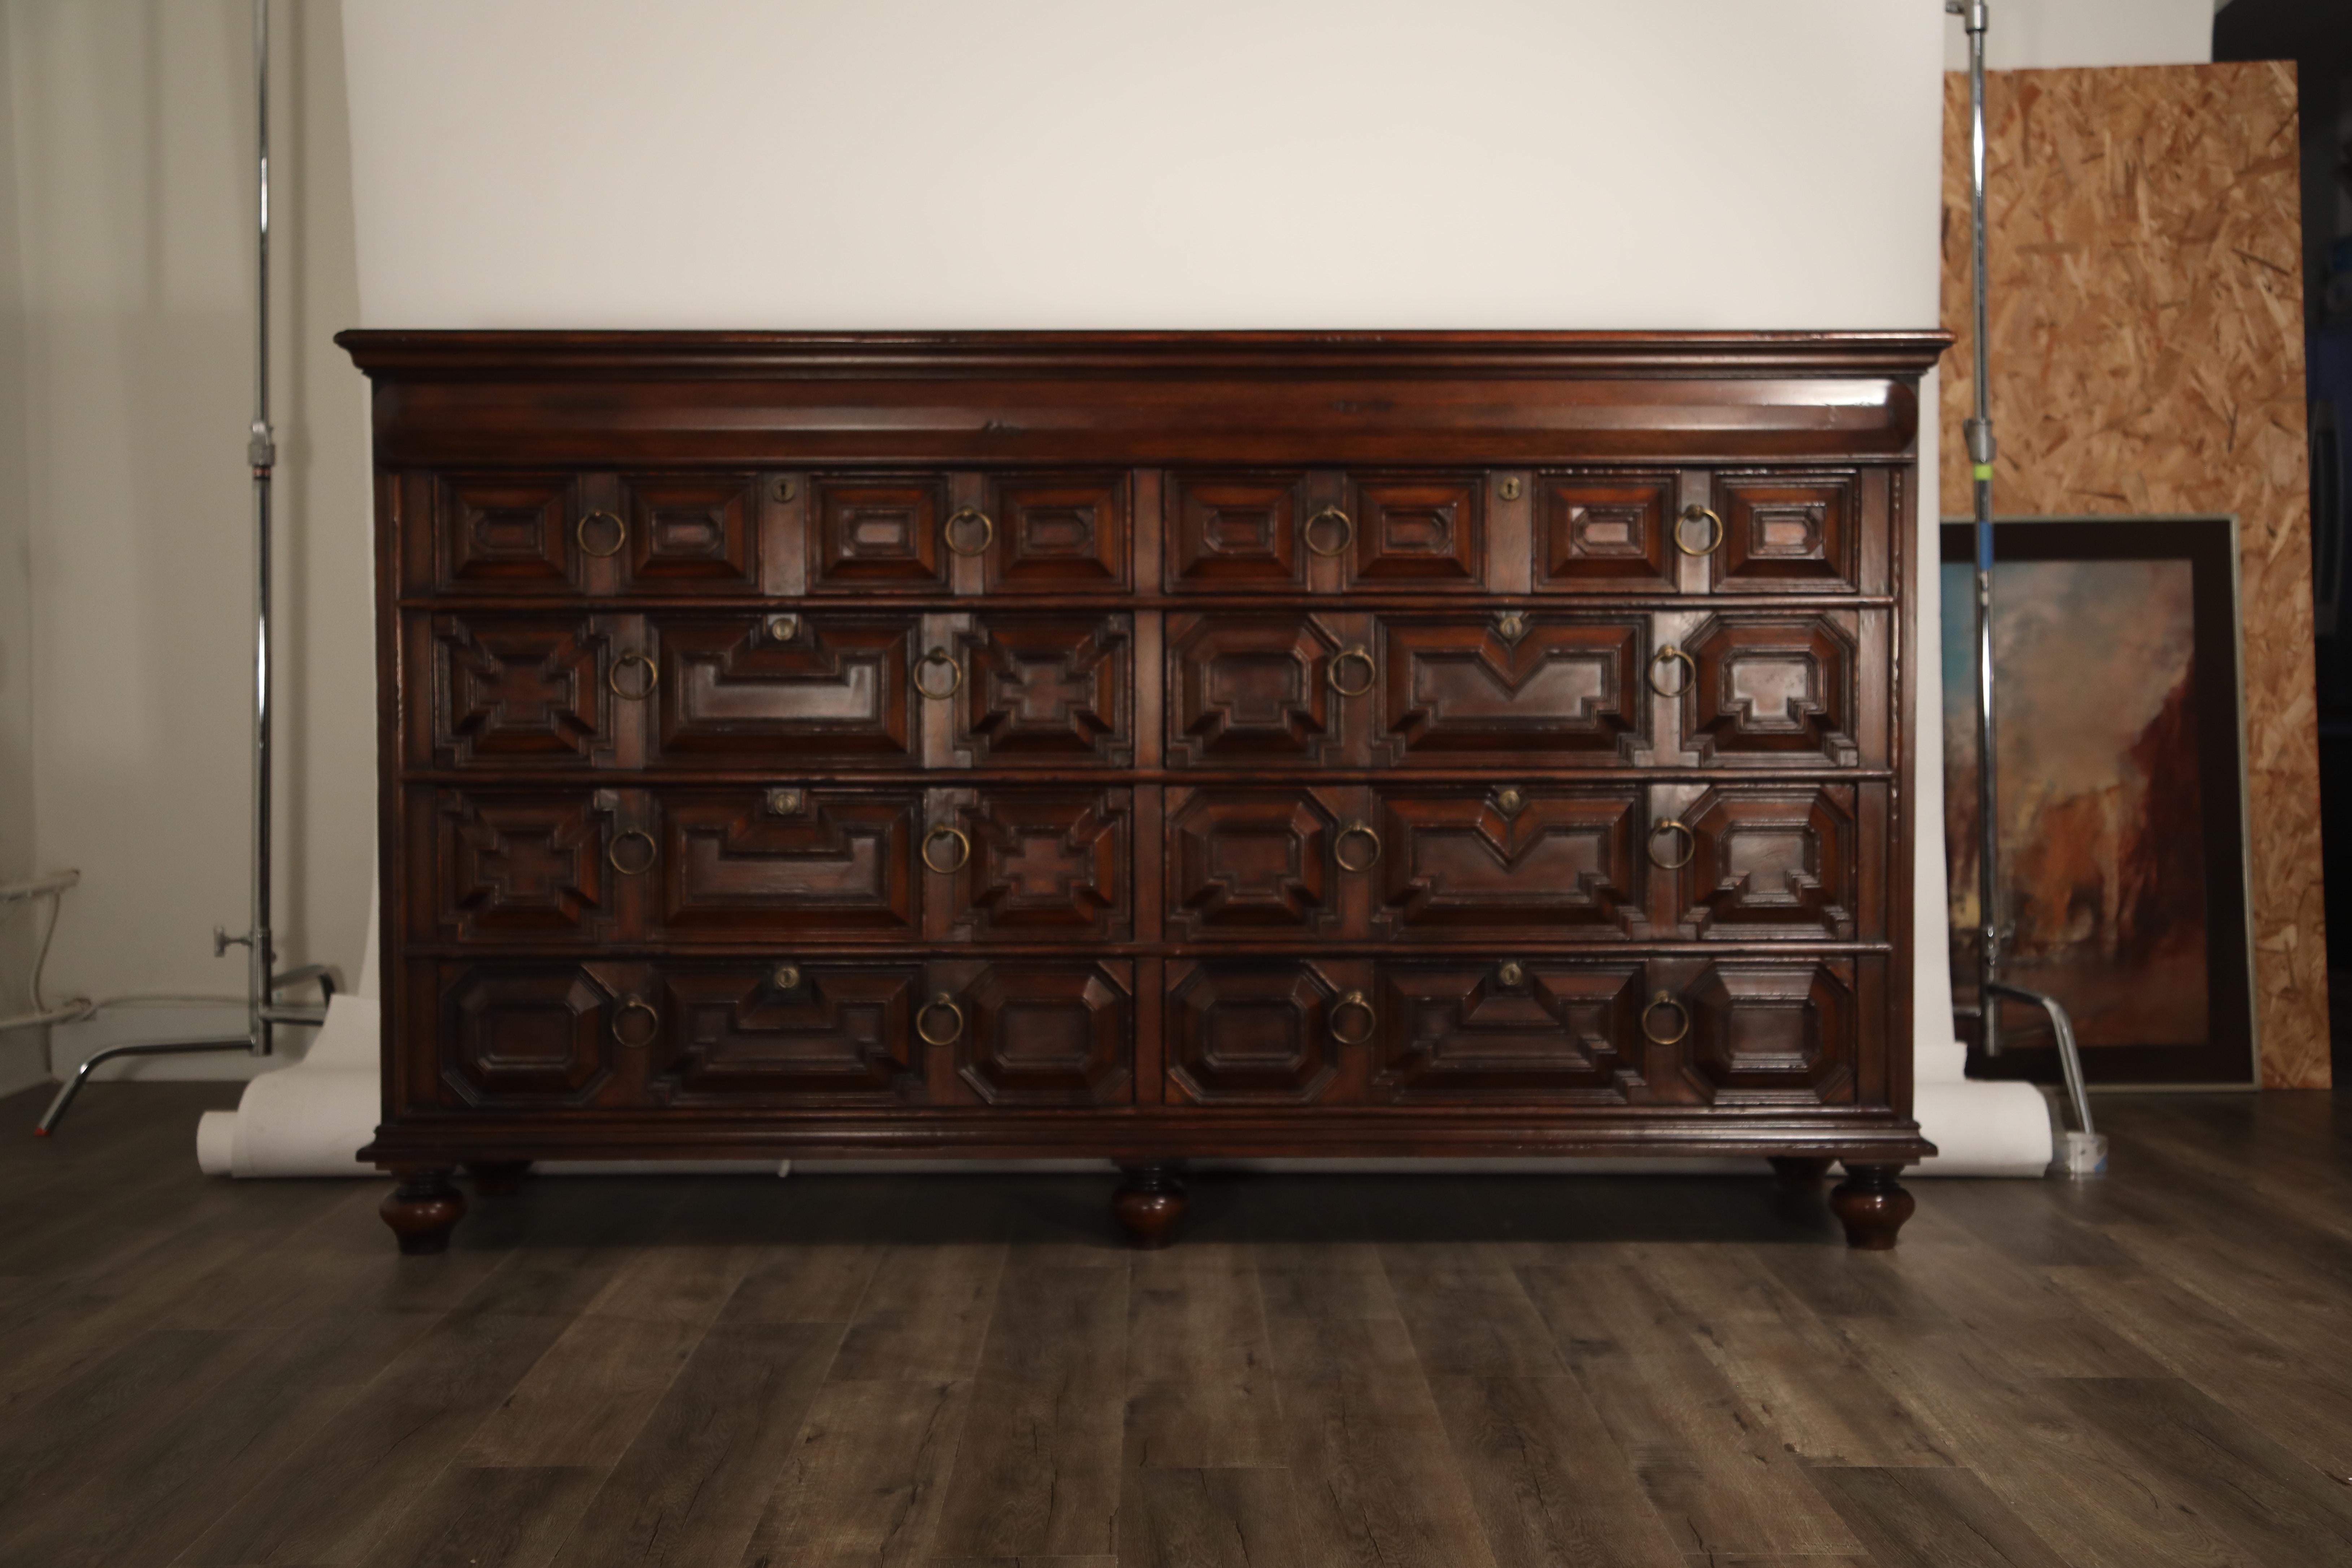 This phenomenal 'Polo by Ralph Lauren' (signed with Polo Ralph Lauren badge in top right drawer) 'Brittany' chest of drawers is a monumentally sized piece, at 48